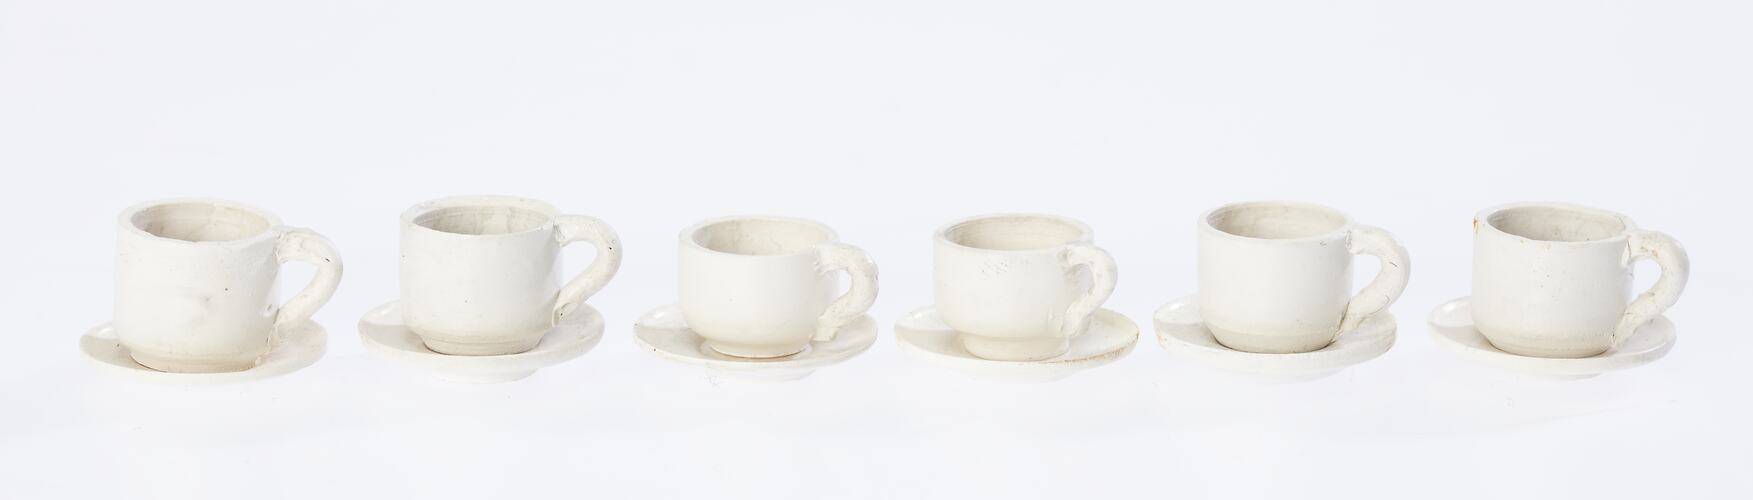 Model of six miniature white cups and saucers.